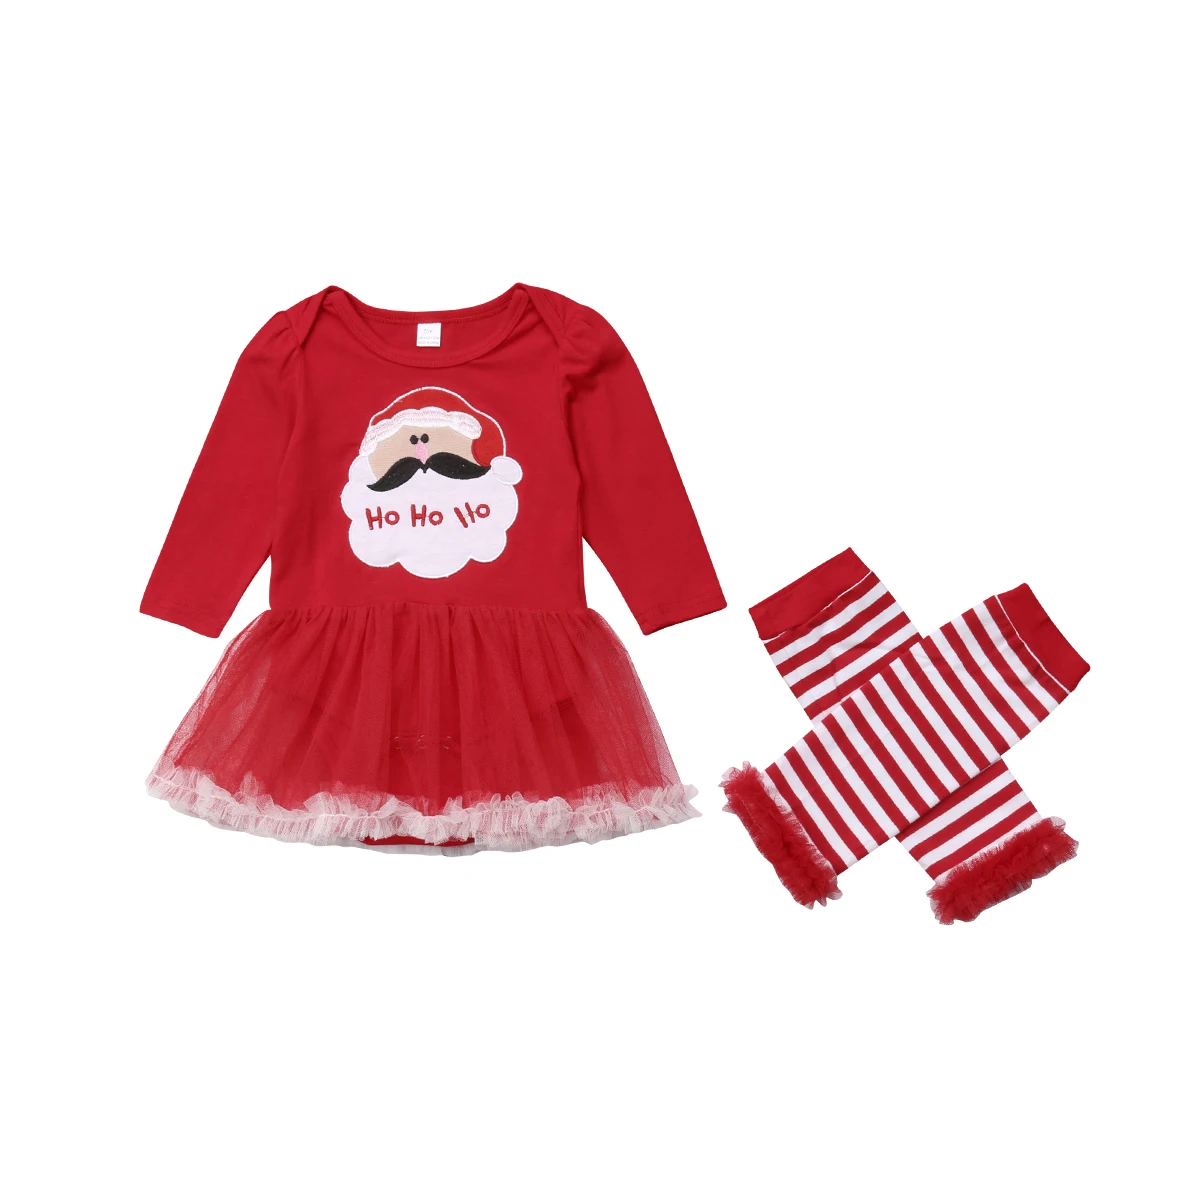 Pudcoco High Quality Newly Infant Baby Girl XMAS Christmas Santa Dresses Spring Autumn Comfort Leg Warmers Outfit Girl Clothes